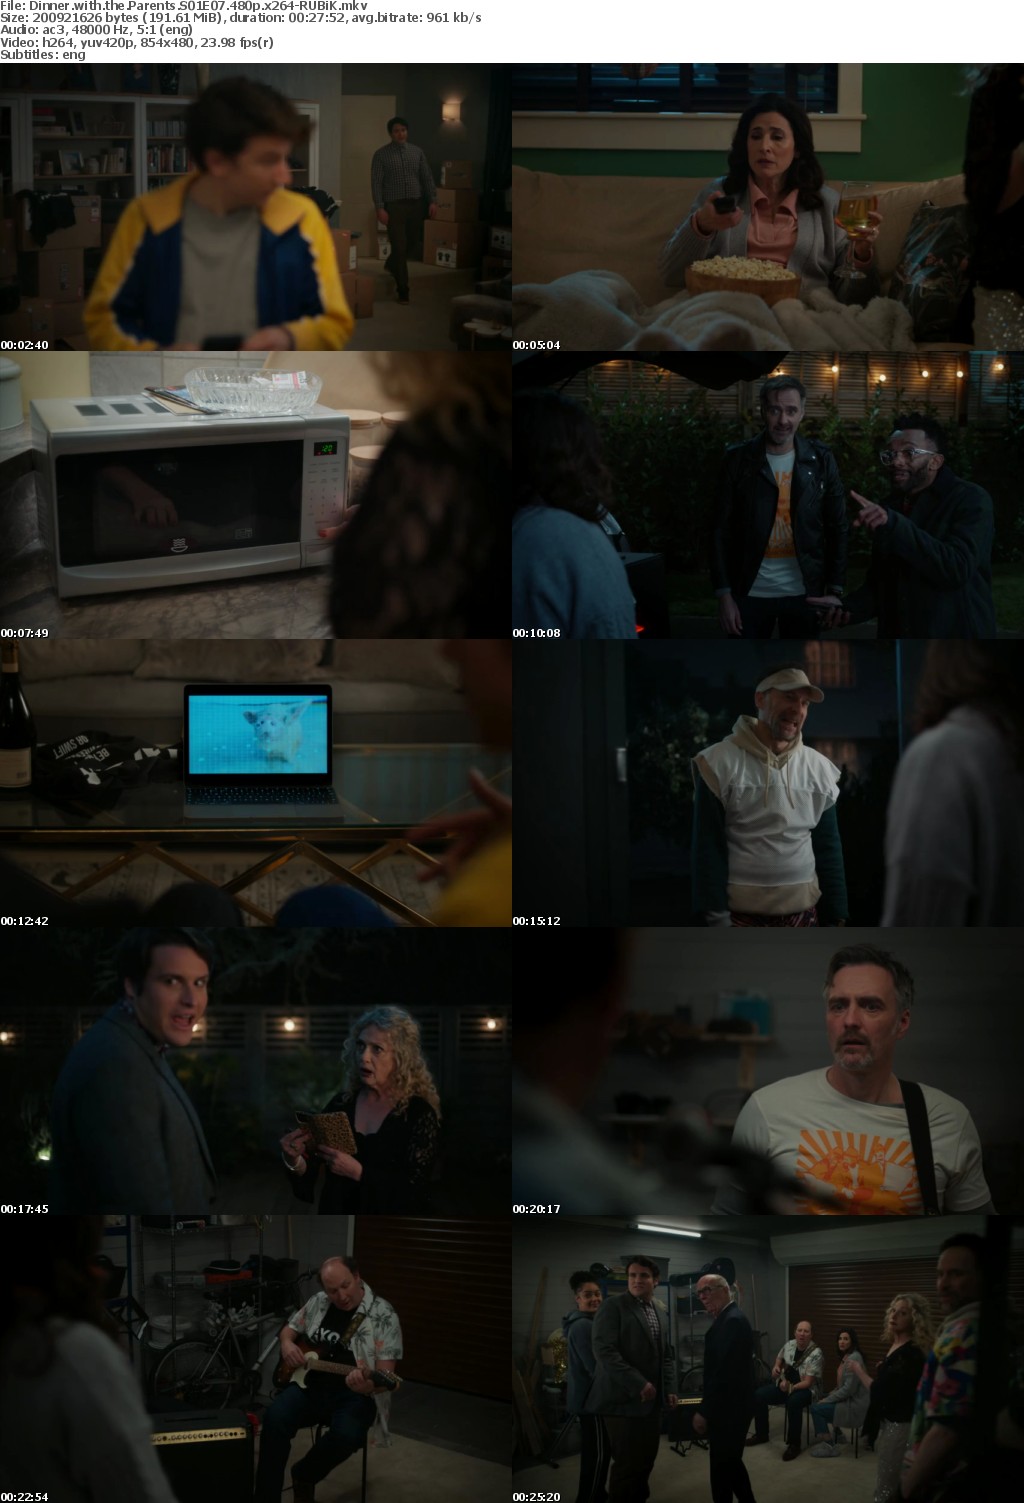 Dinner with the Parents S01E07 480p x264-RUBiK Saturn5